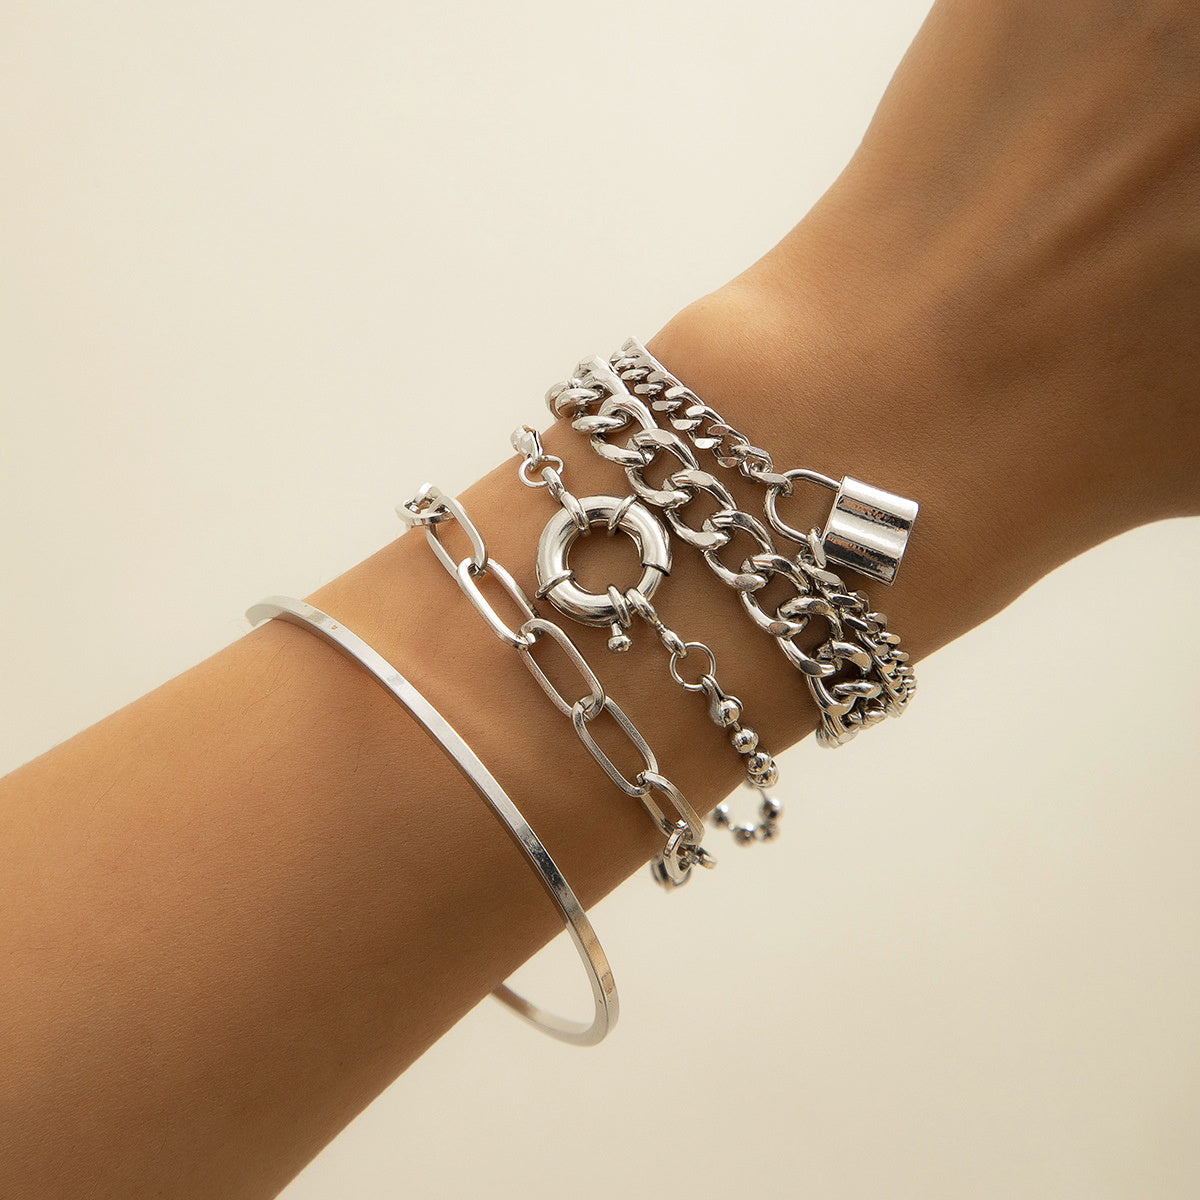 Gorgeous Cutout Open Bracelet Set - Perfect for Any Occasion!